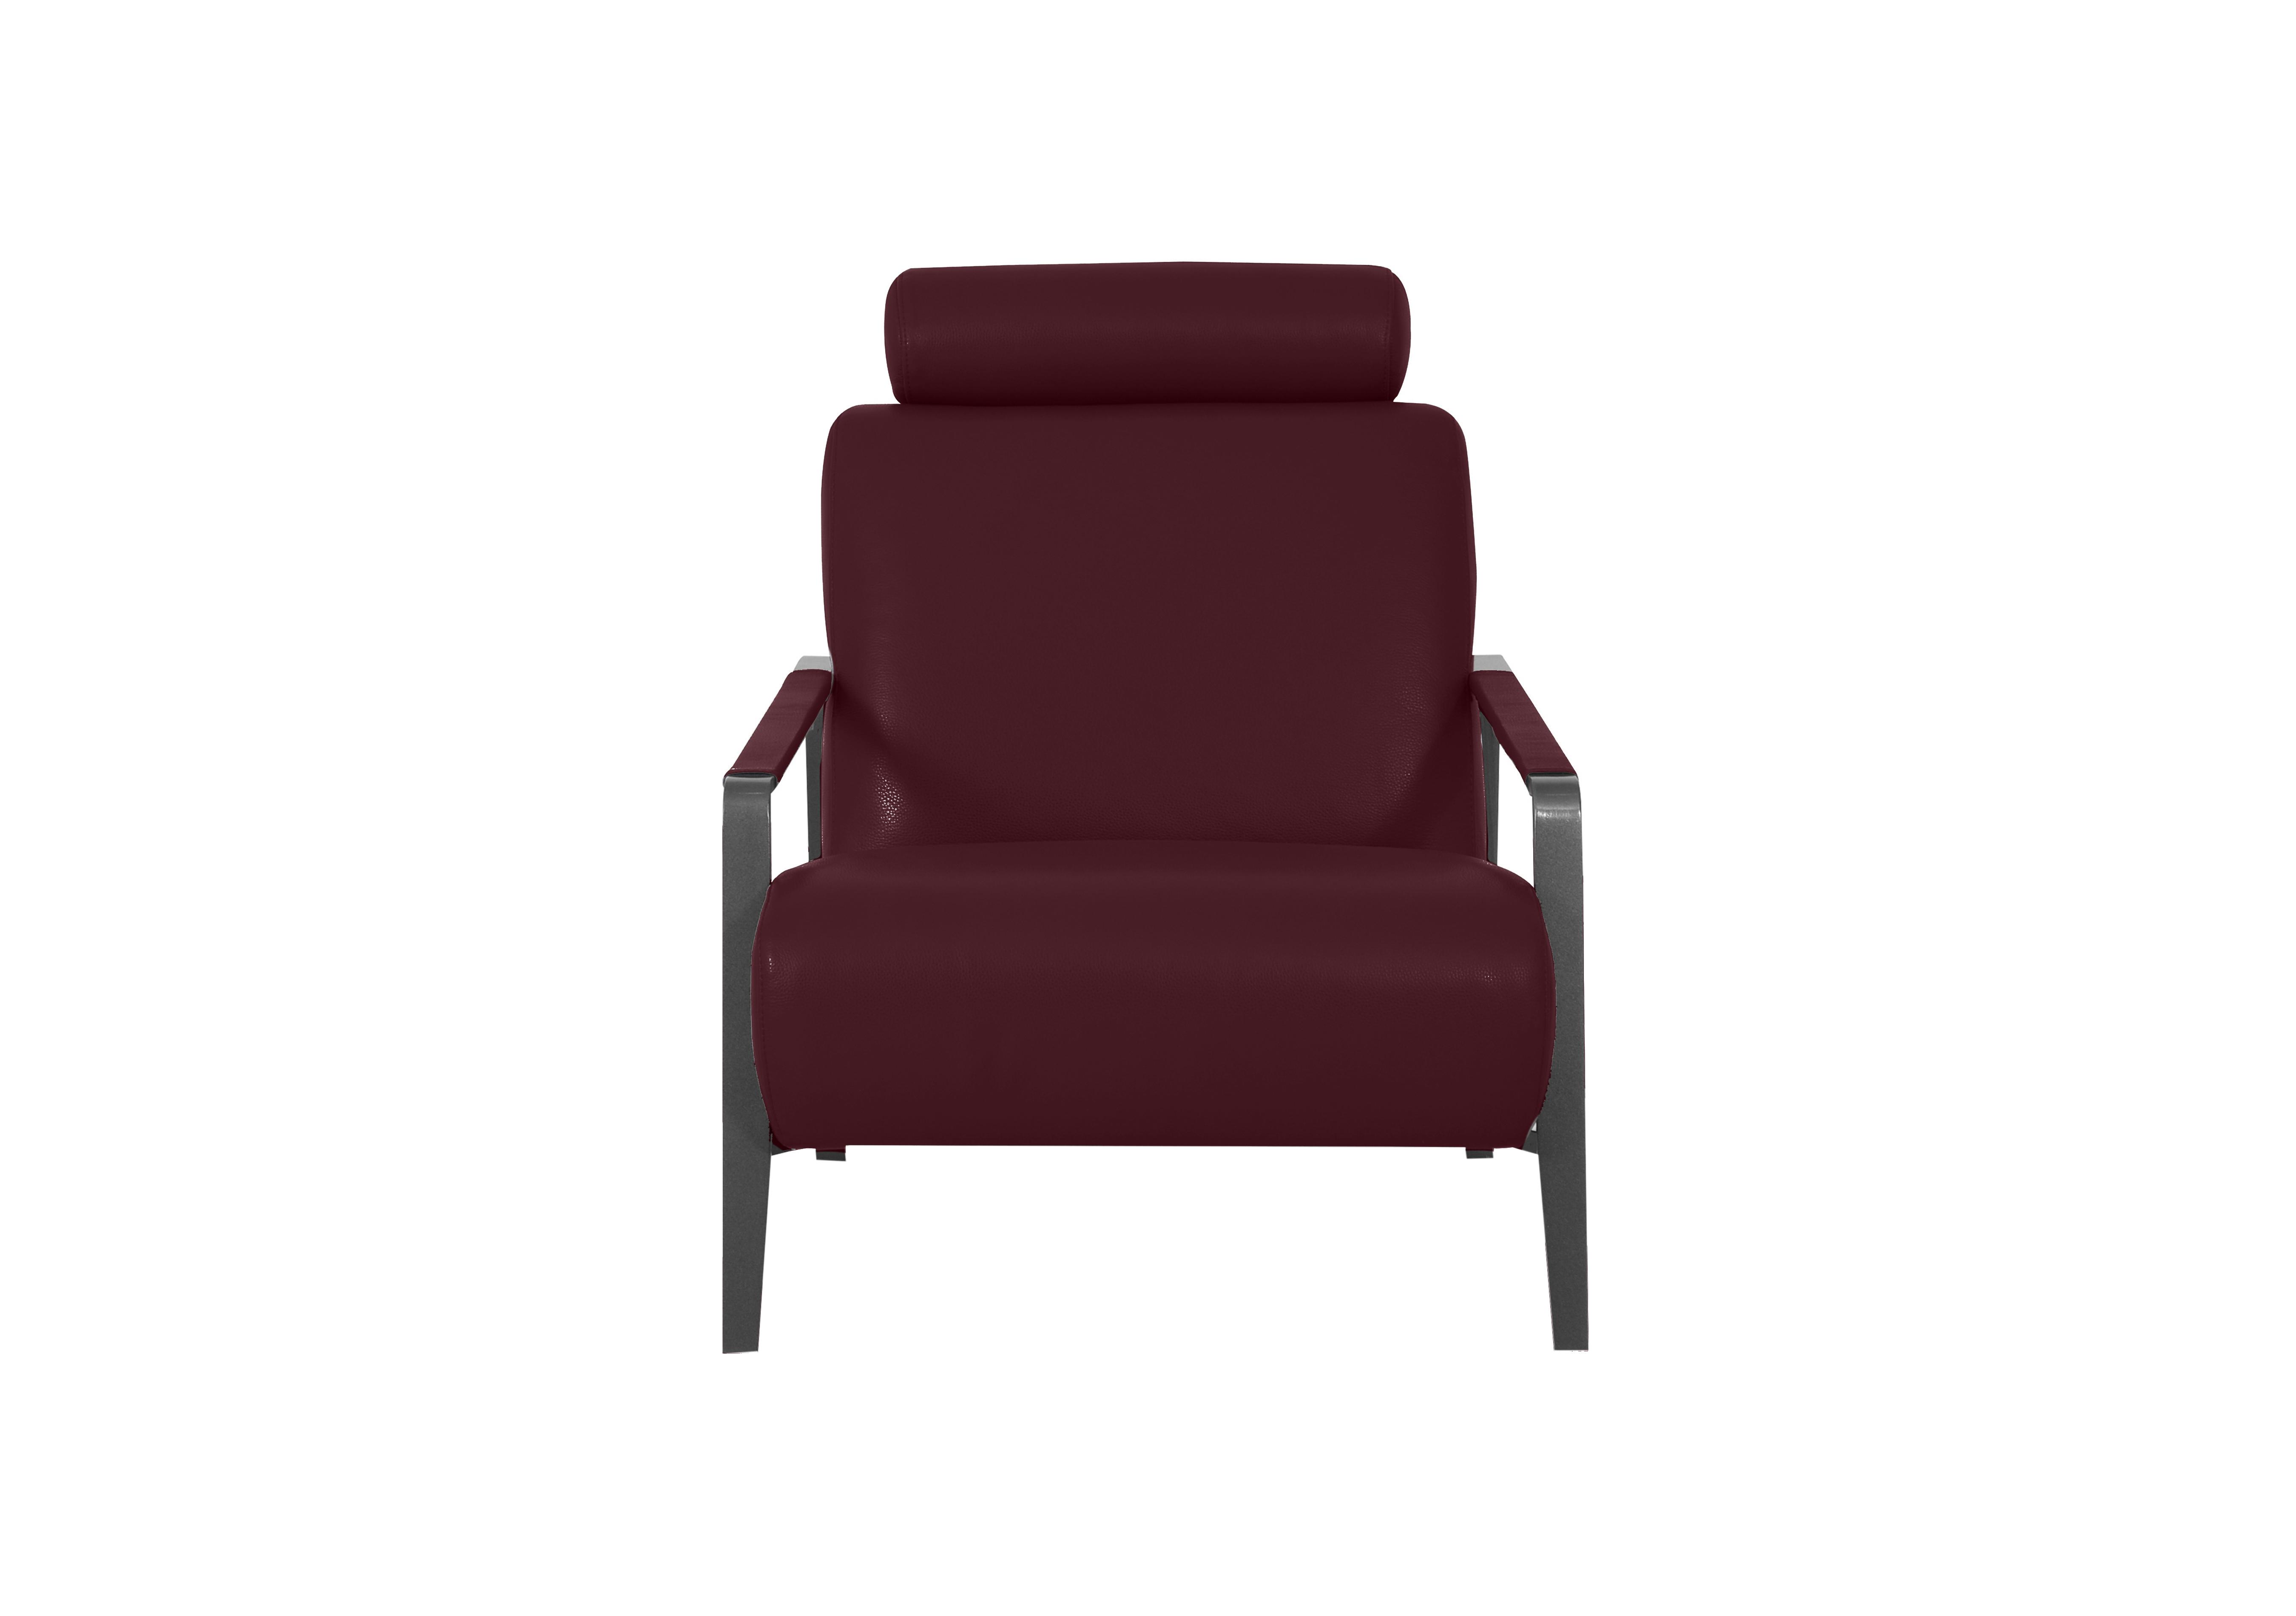 Lawson Leather Accent Chair in Np-549e Ruby on Furniture Village